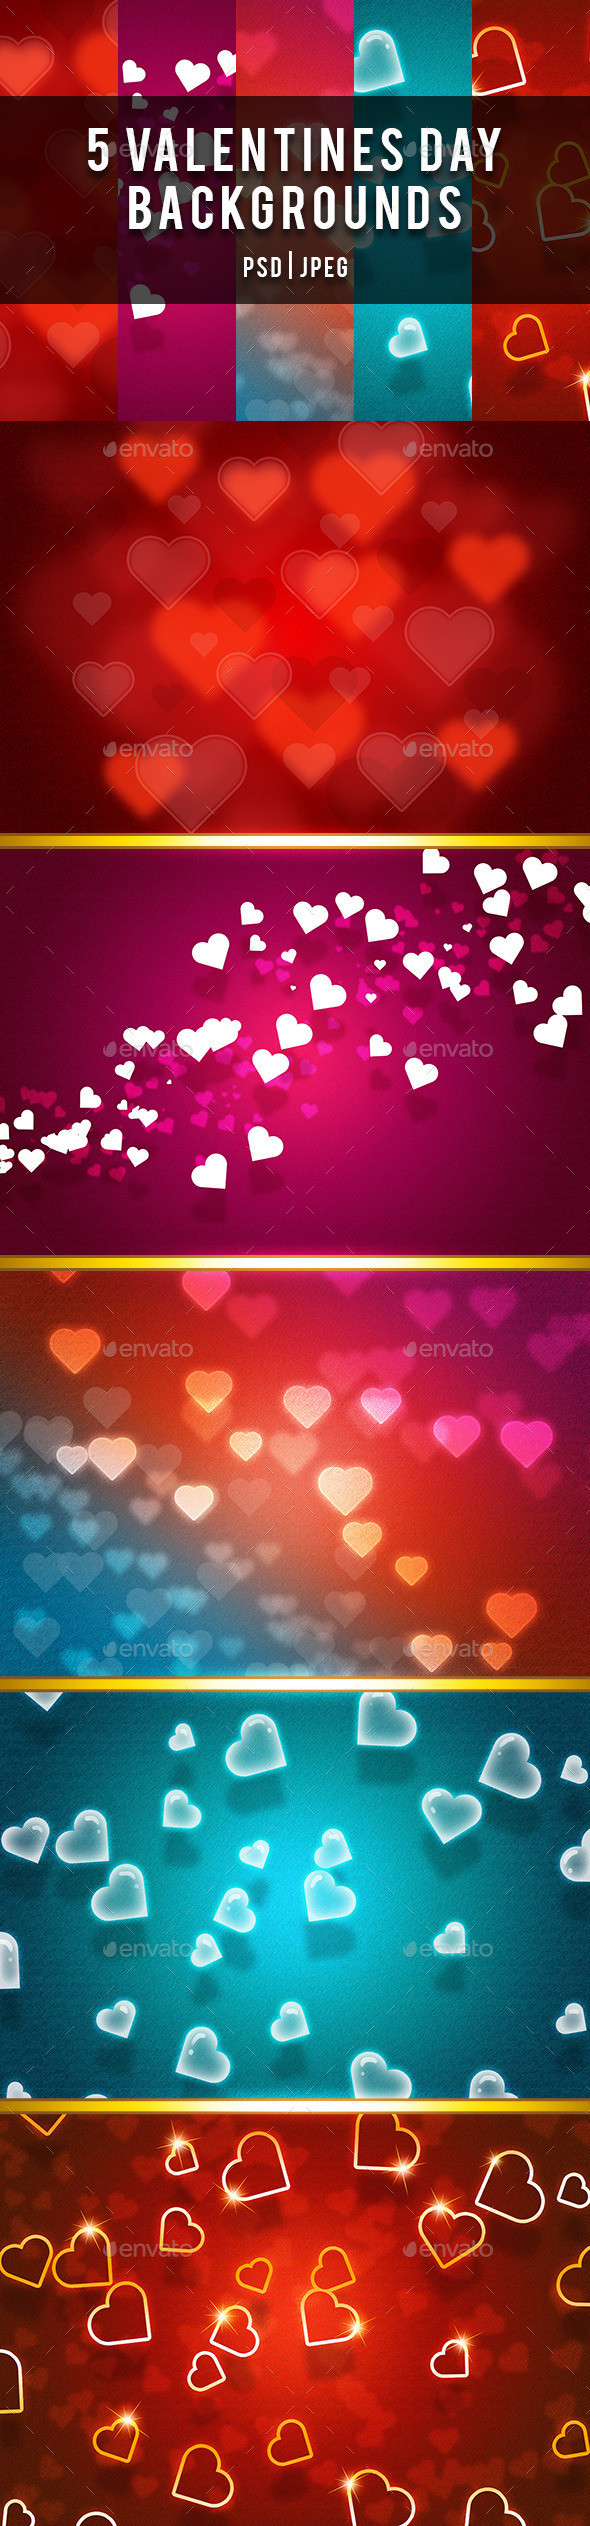 Valentine 20backgrounds 20image 20preview